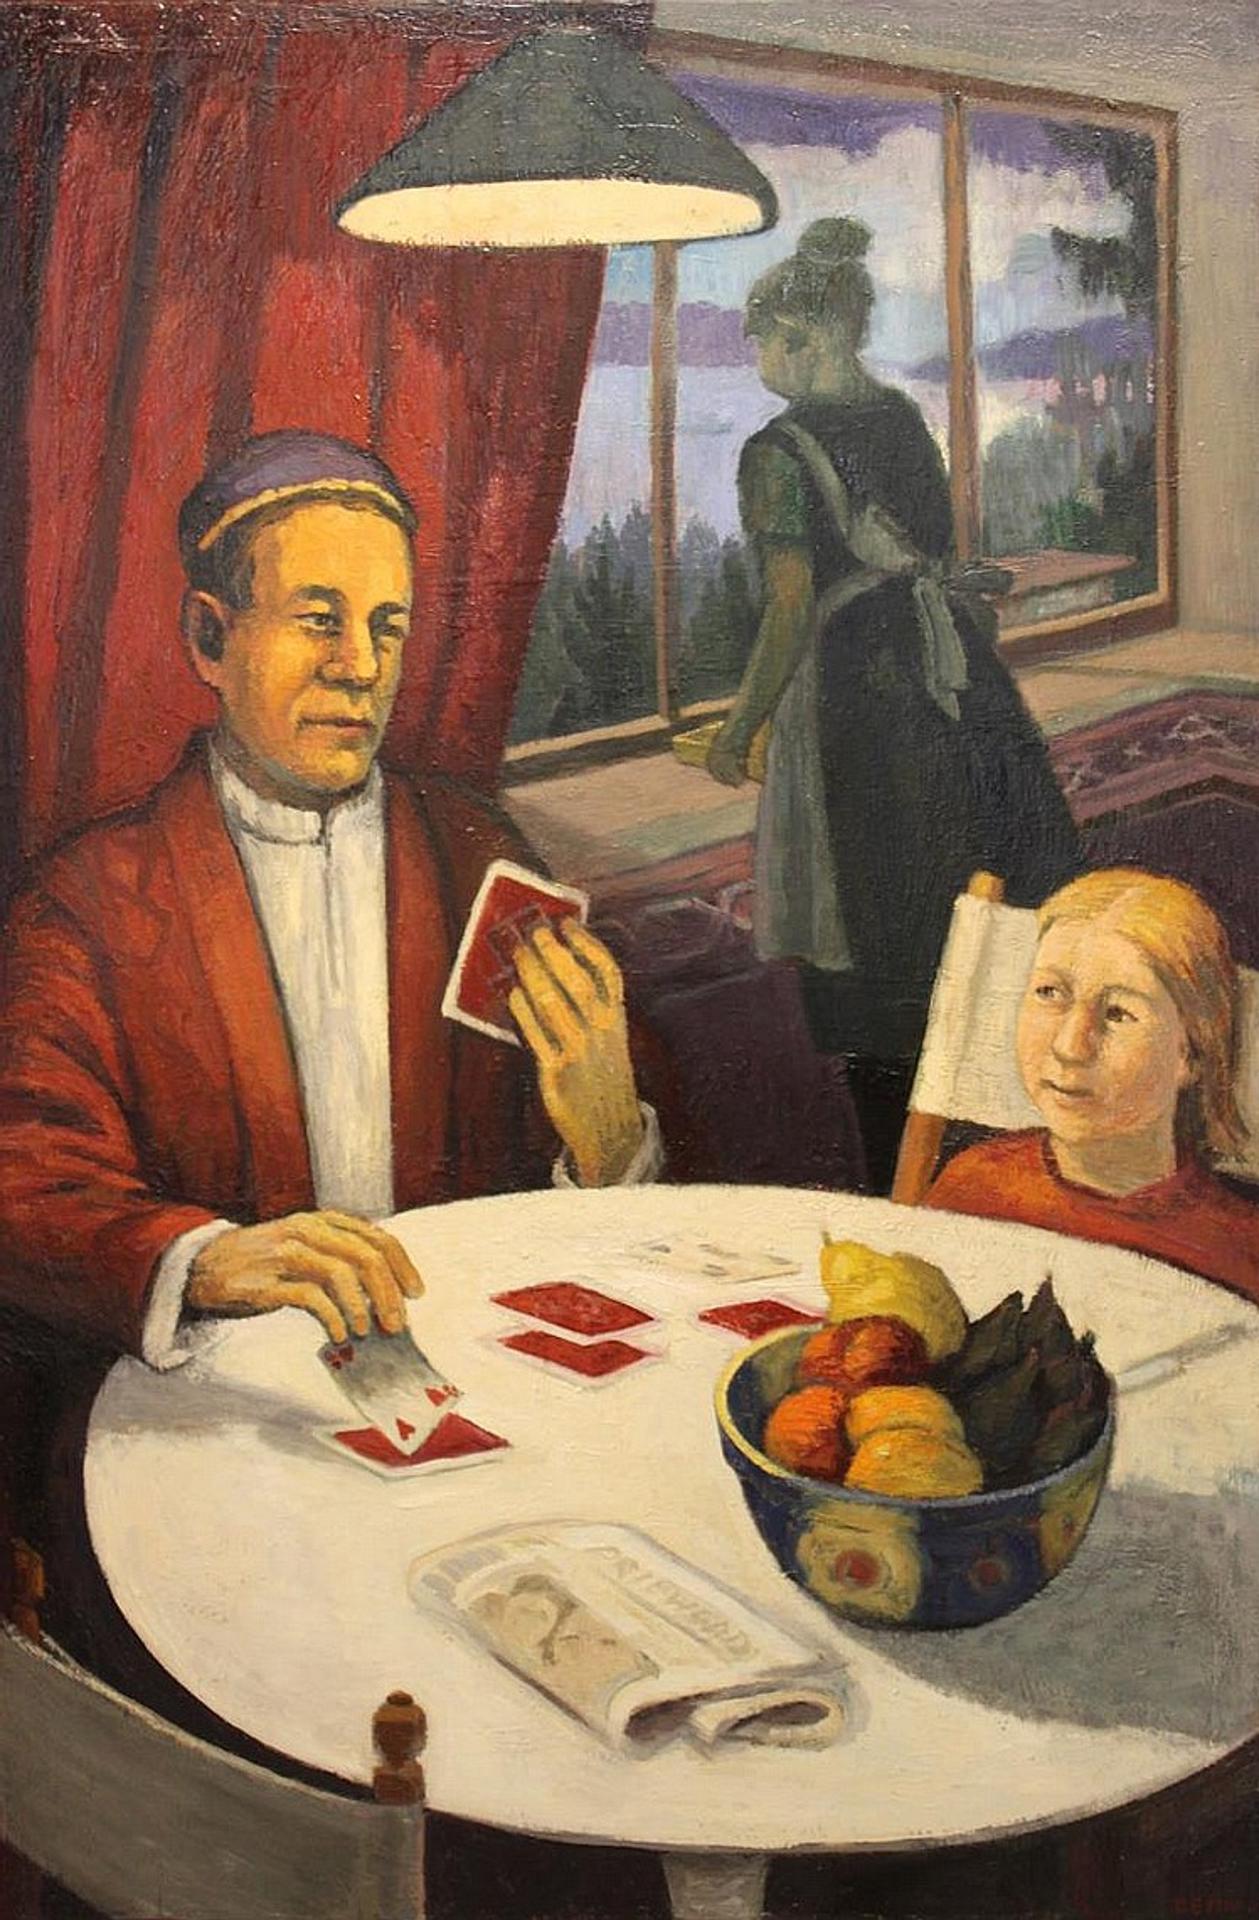 Diana Dean (1942) - The Four of Hearts